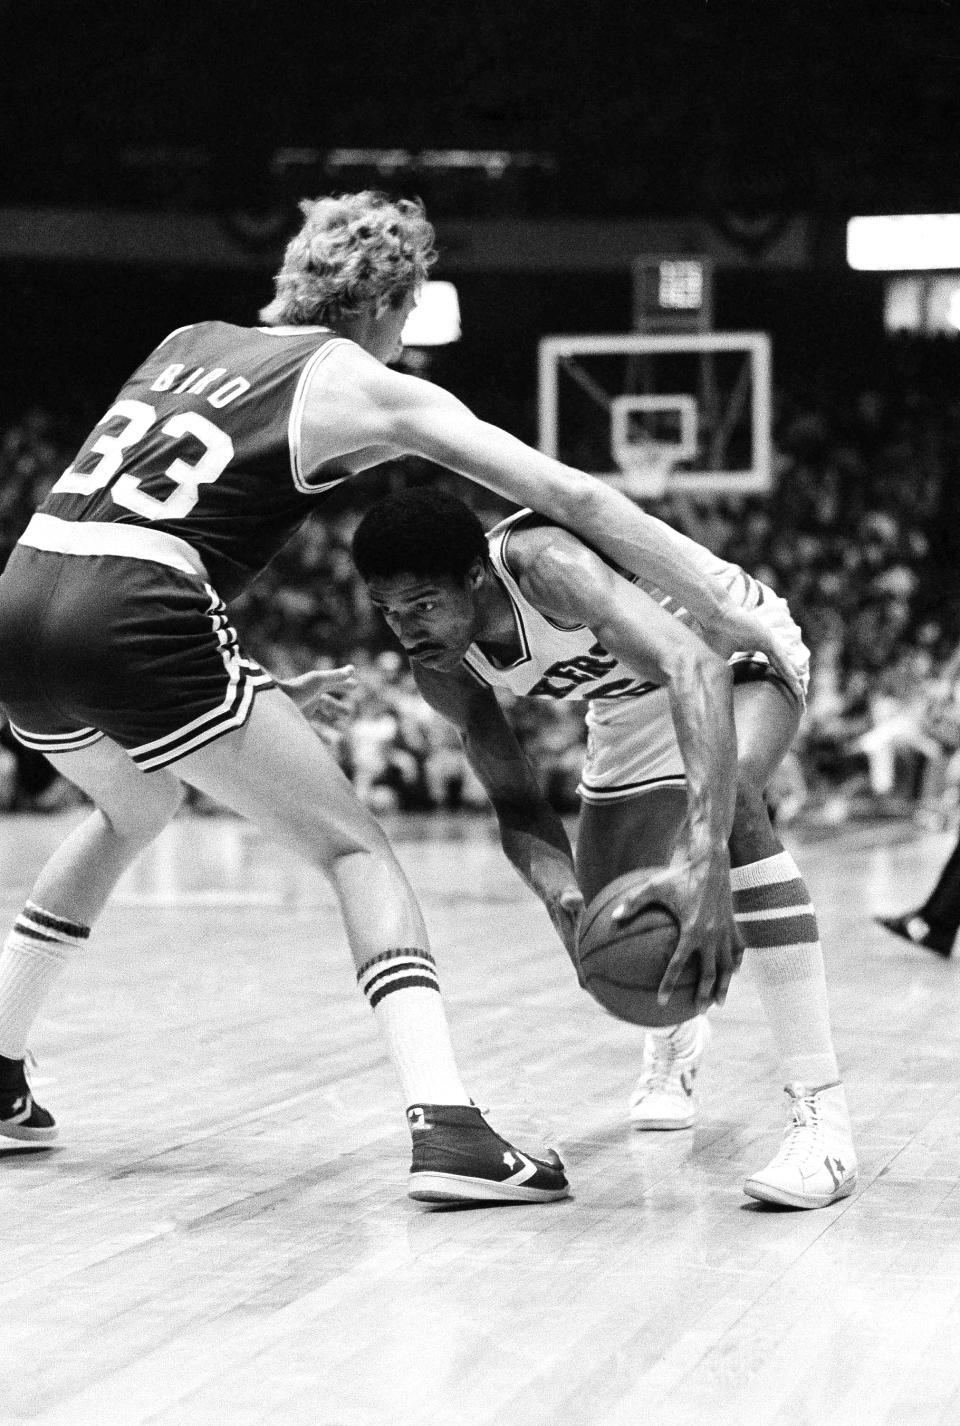 Sixers Julius Erving, right, ducks under Boston Celtics Larry Bird’s arm on his way to two of his 30 points in Game 4 of the best of seven NBA semi-final playoff series at Philadelphia, April 26, 1980. Philadelphia won the game 102-90 to go up 3 games to 1. AP Photo